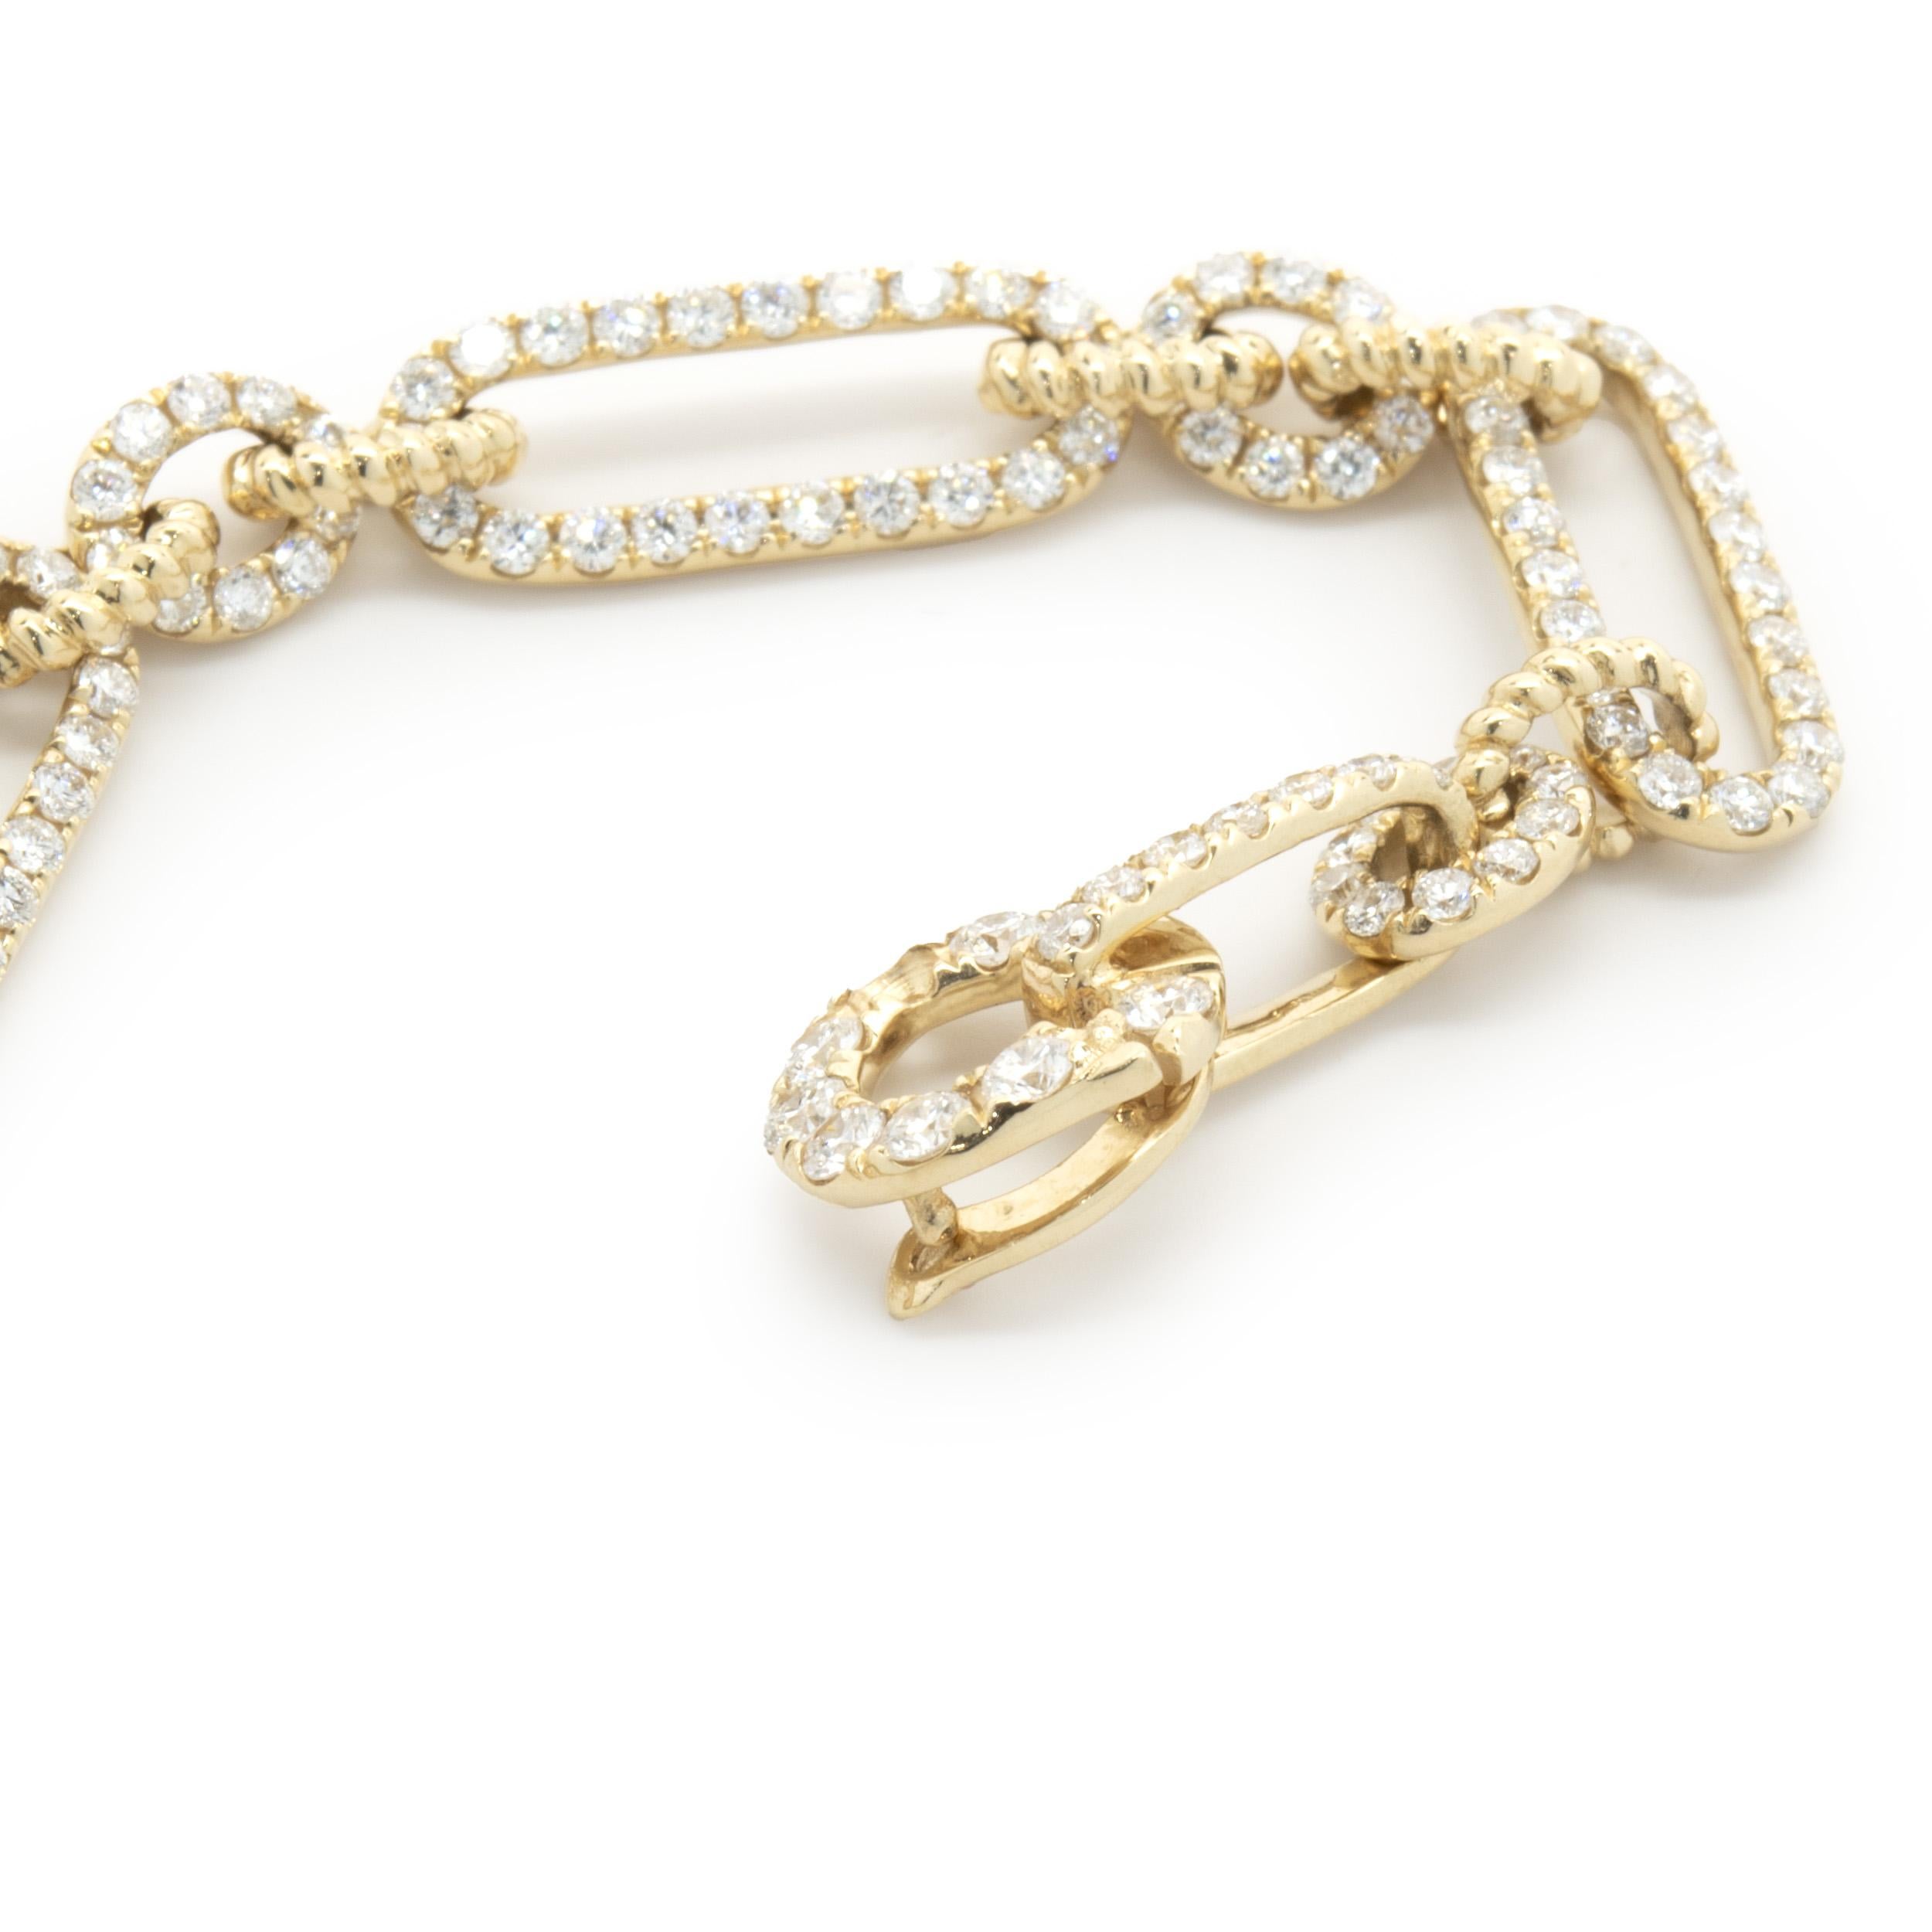 14 Karat Yellow Gold Diamond Oval Link Bracelet In Excellent Condition For Sale In Scottsdale, AZ